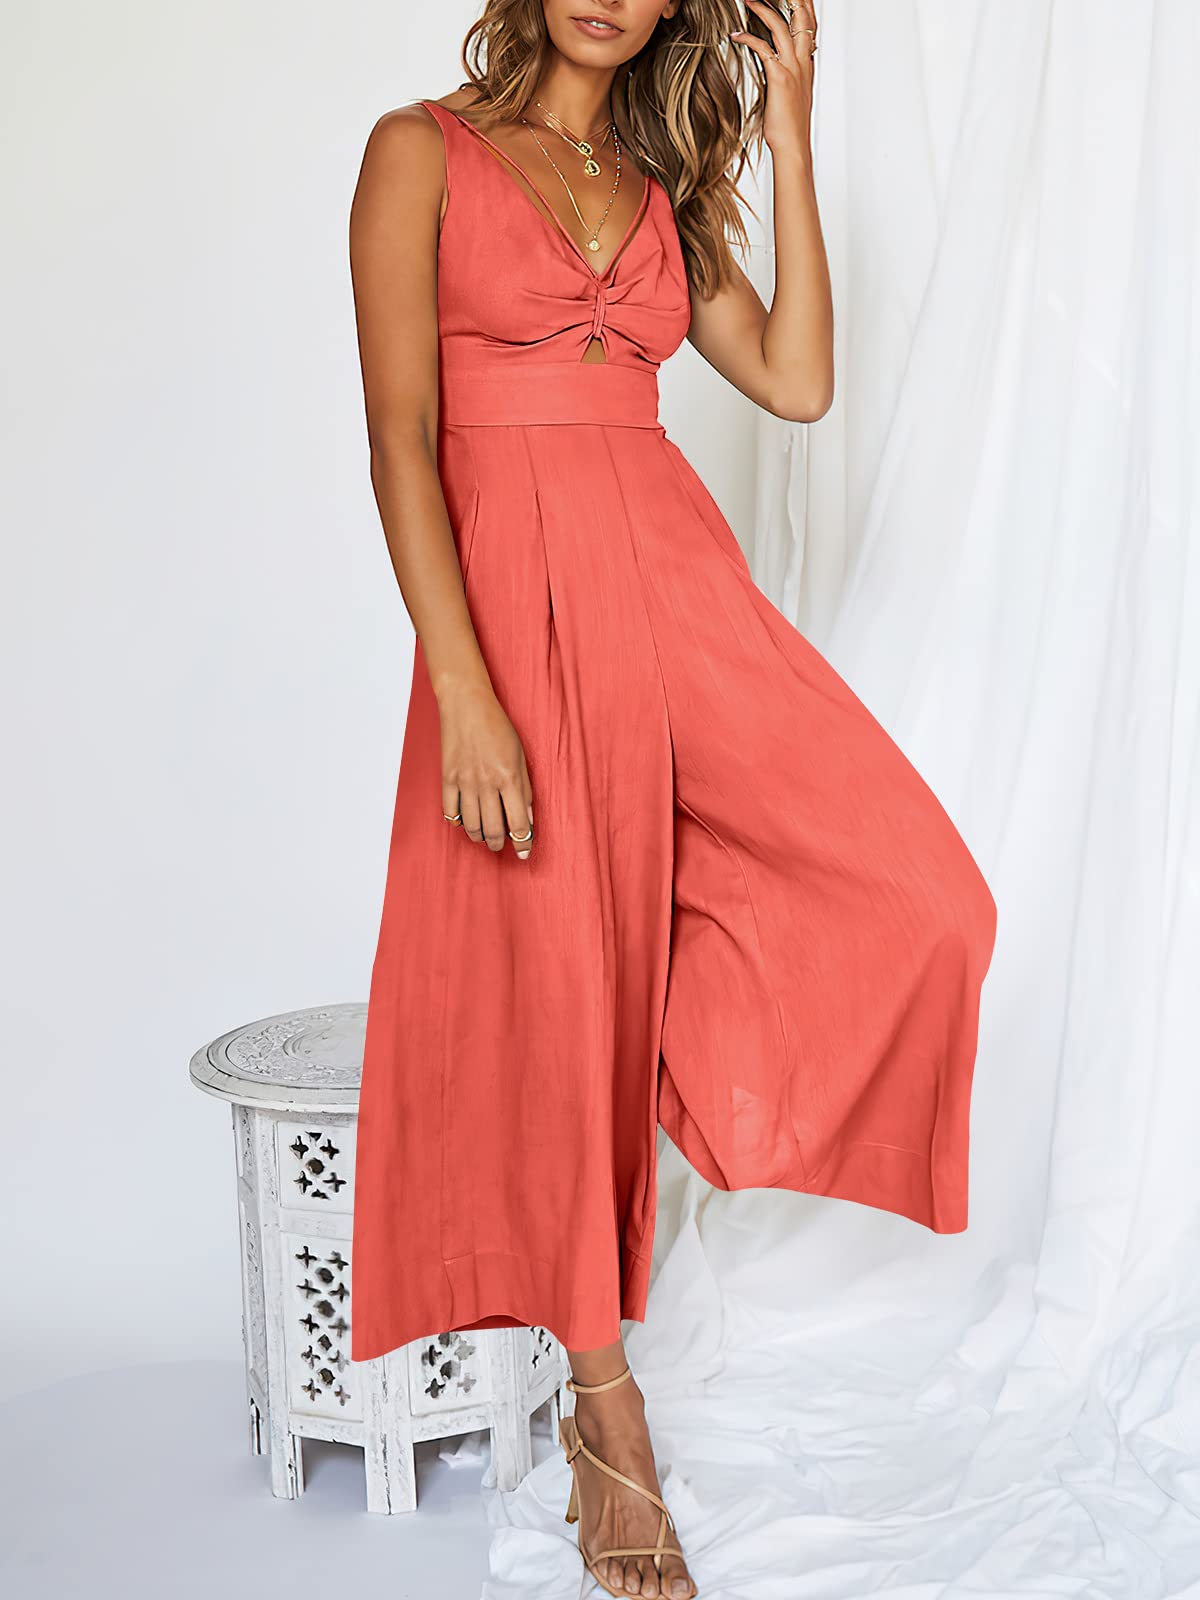 V Neck Cutout High-Waist Rompers (Buy 2 free shipping)